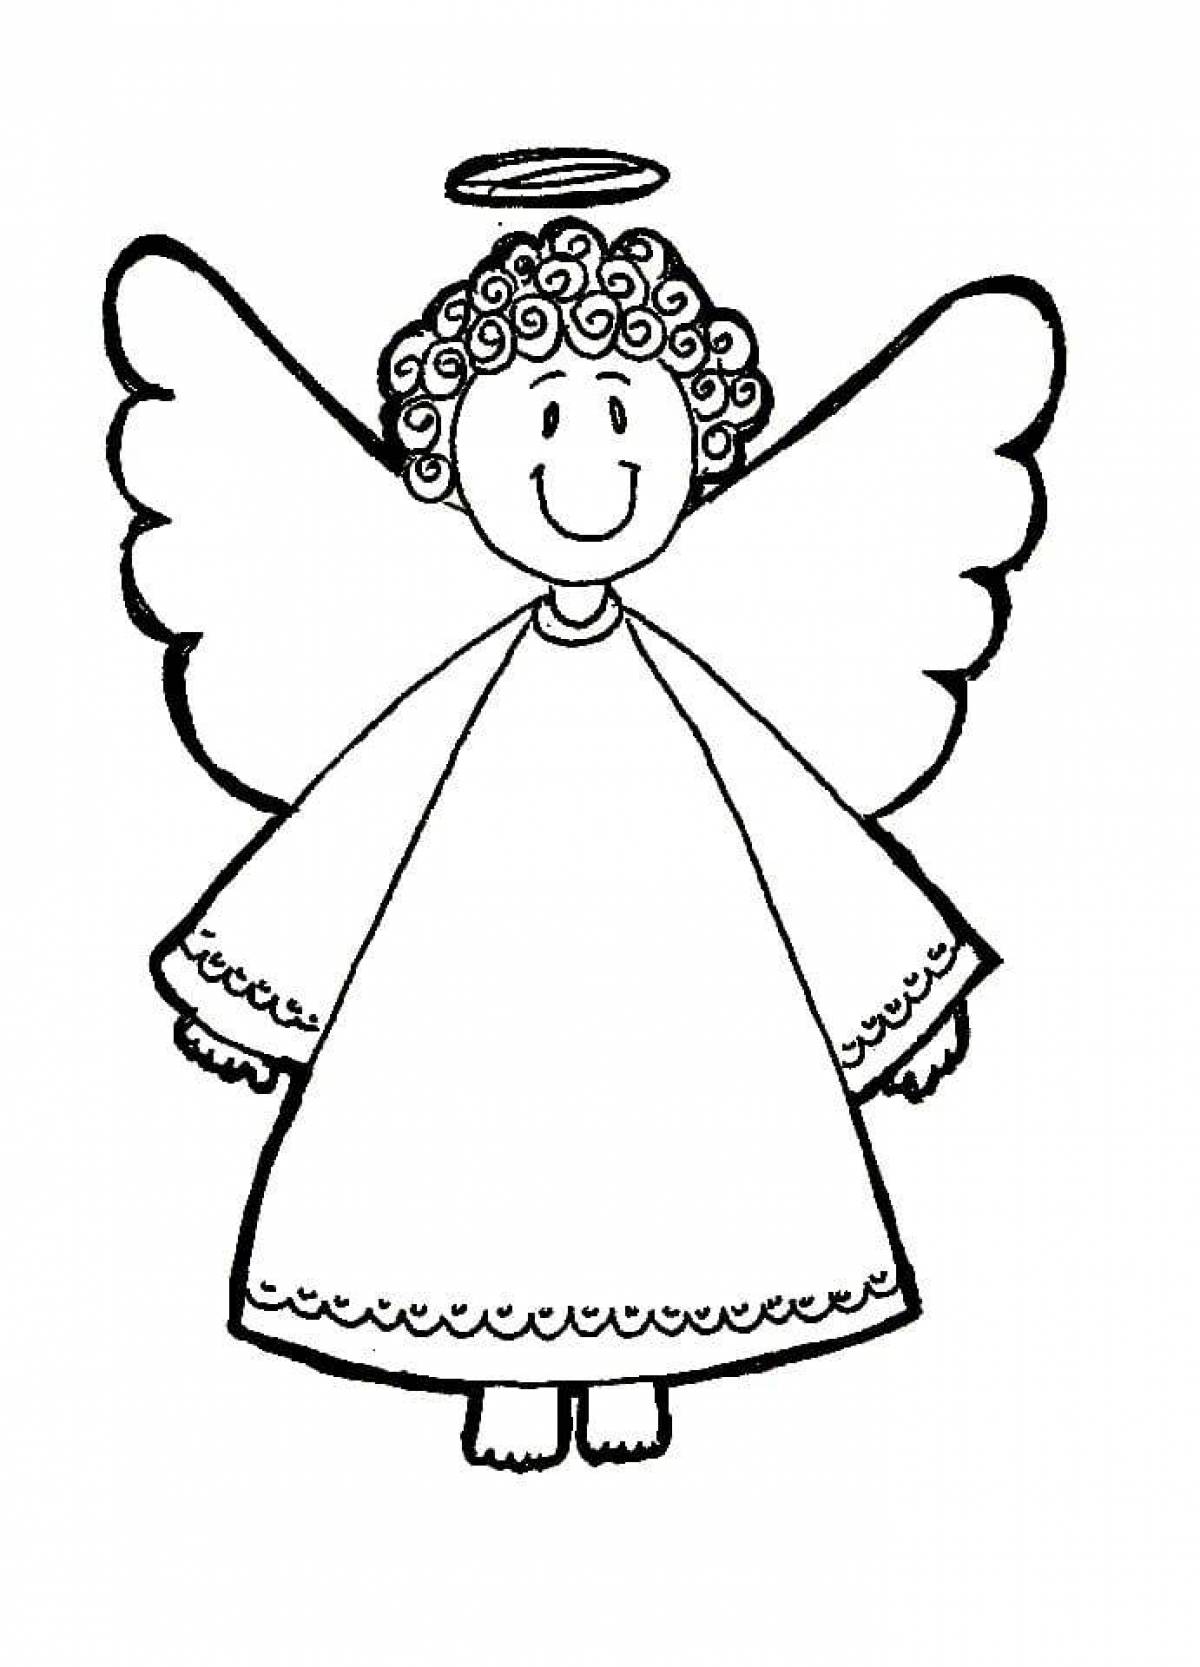 Festive Christmas angel coloring page